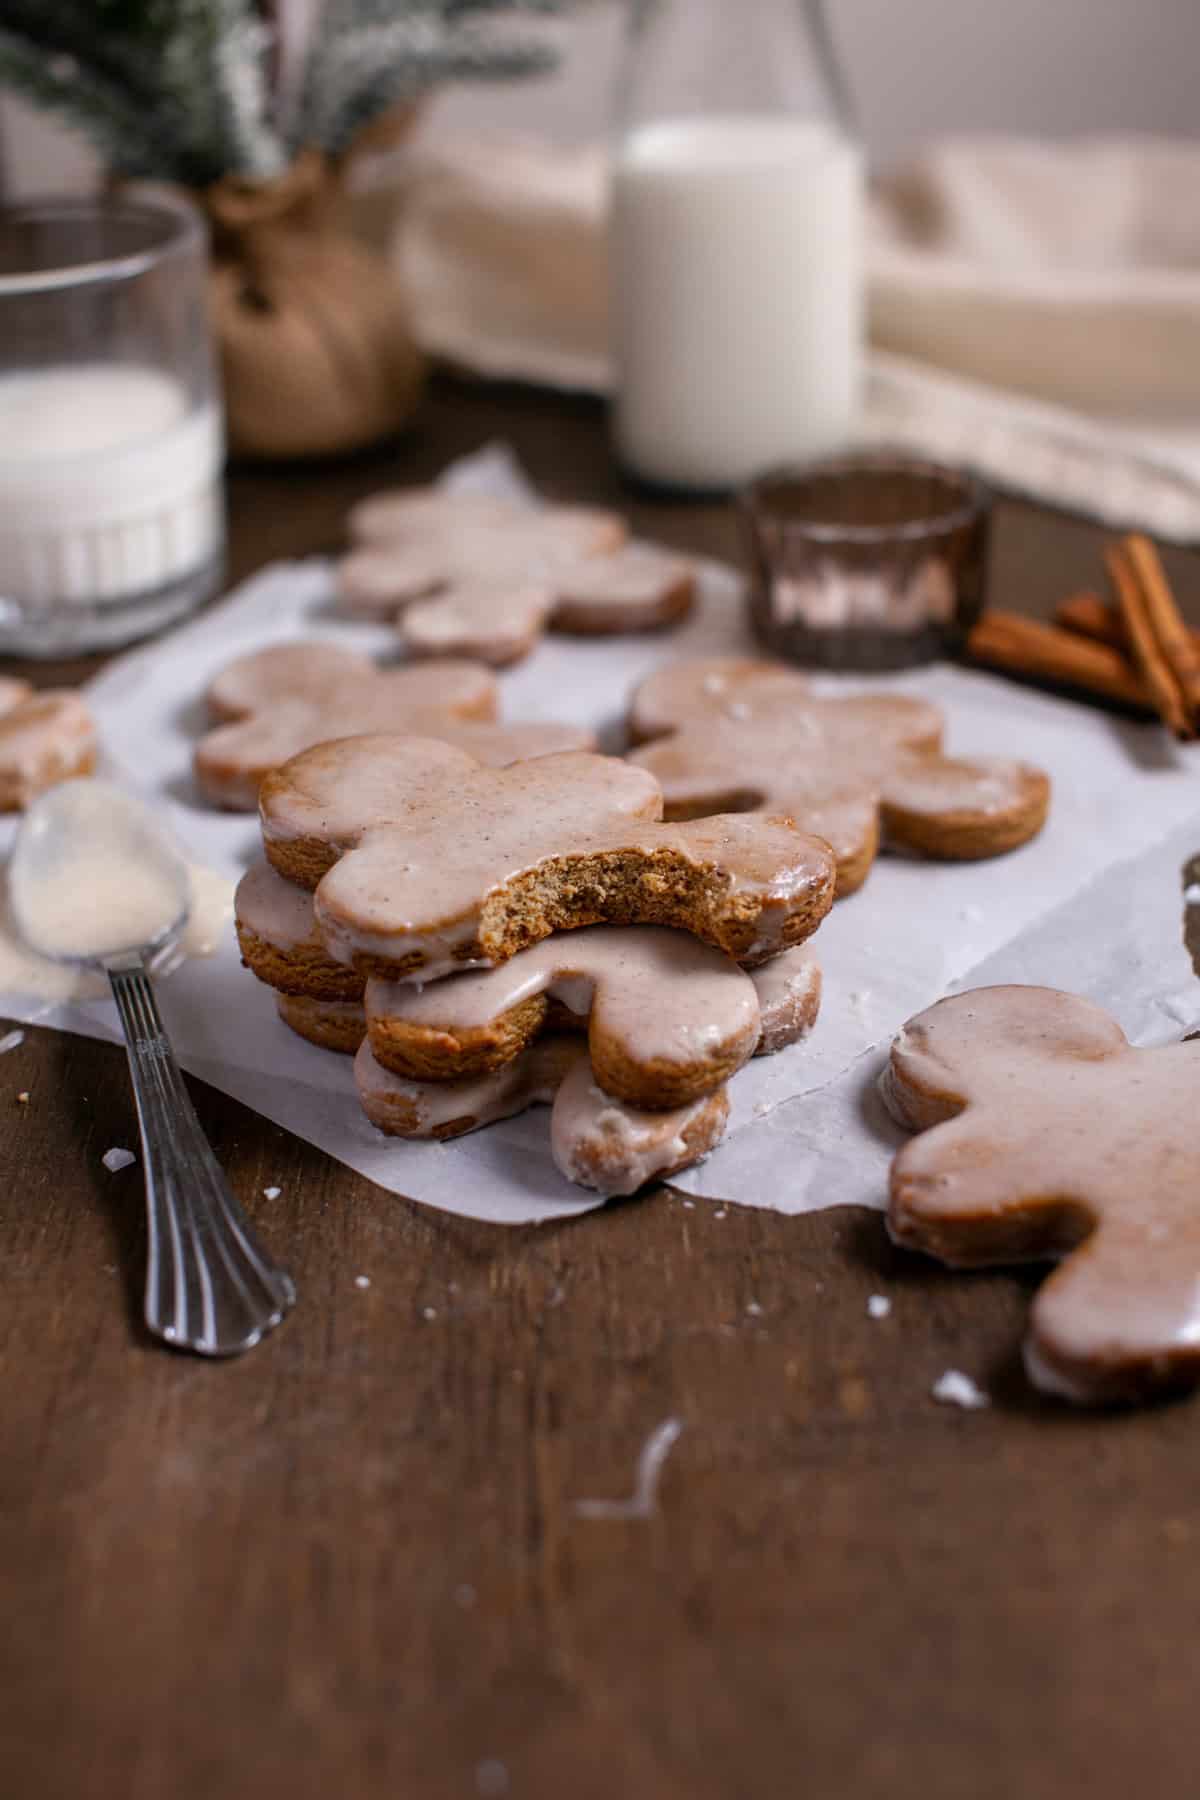 Gingerbread men stacked on parchment paper.